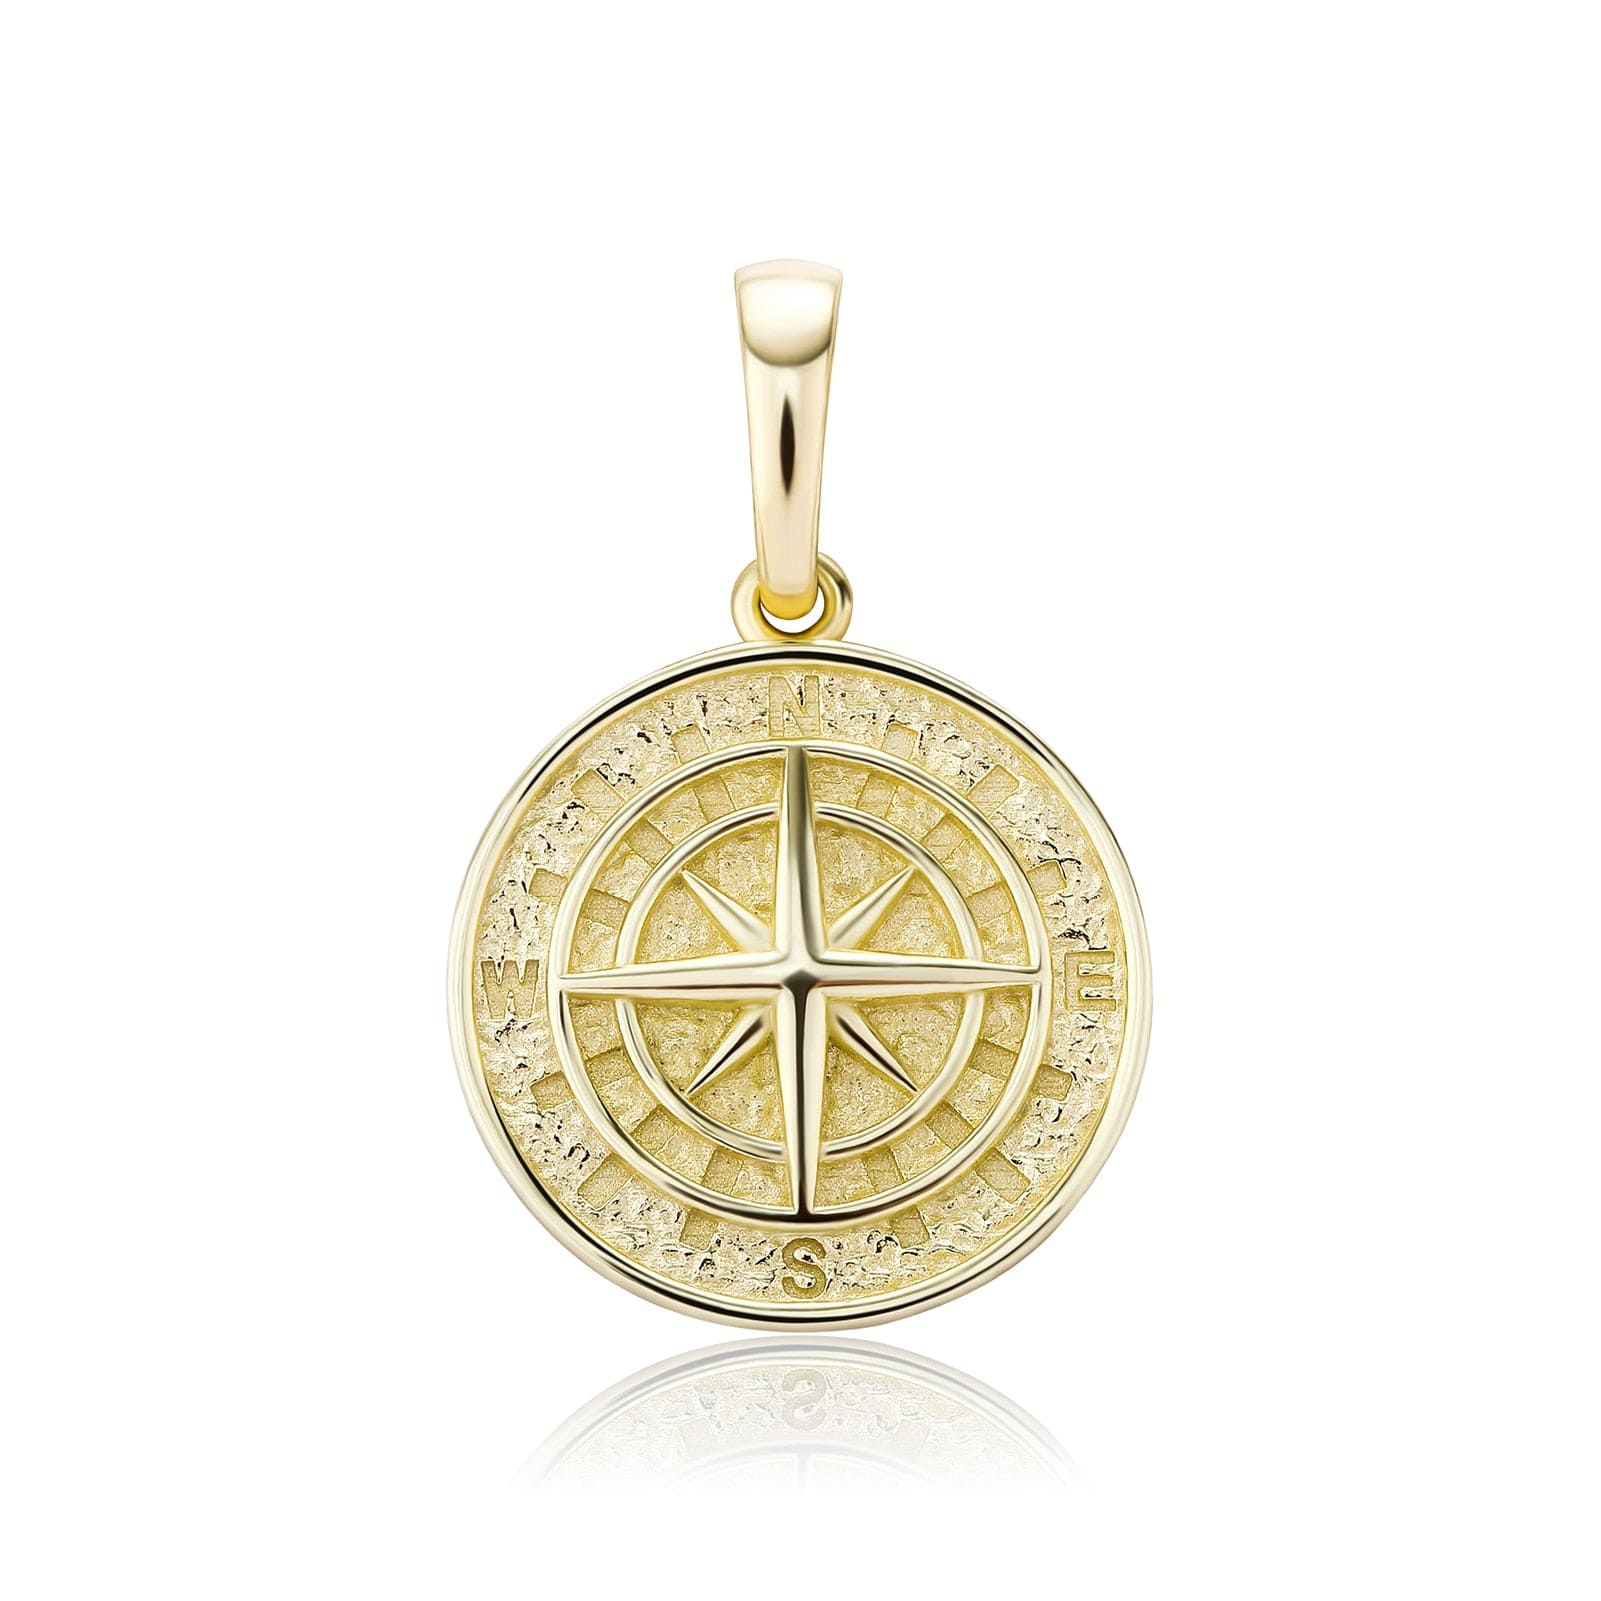 Compass Necklace For Men - Silver, Gold, Rose Gold